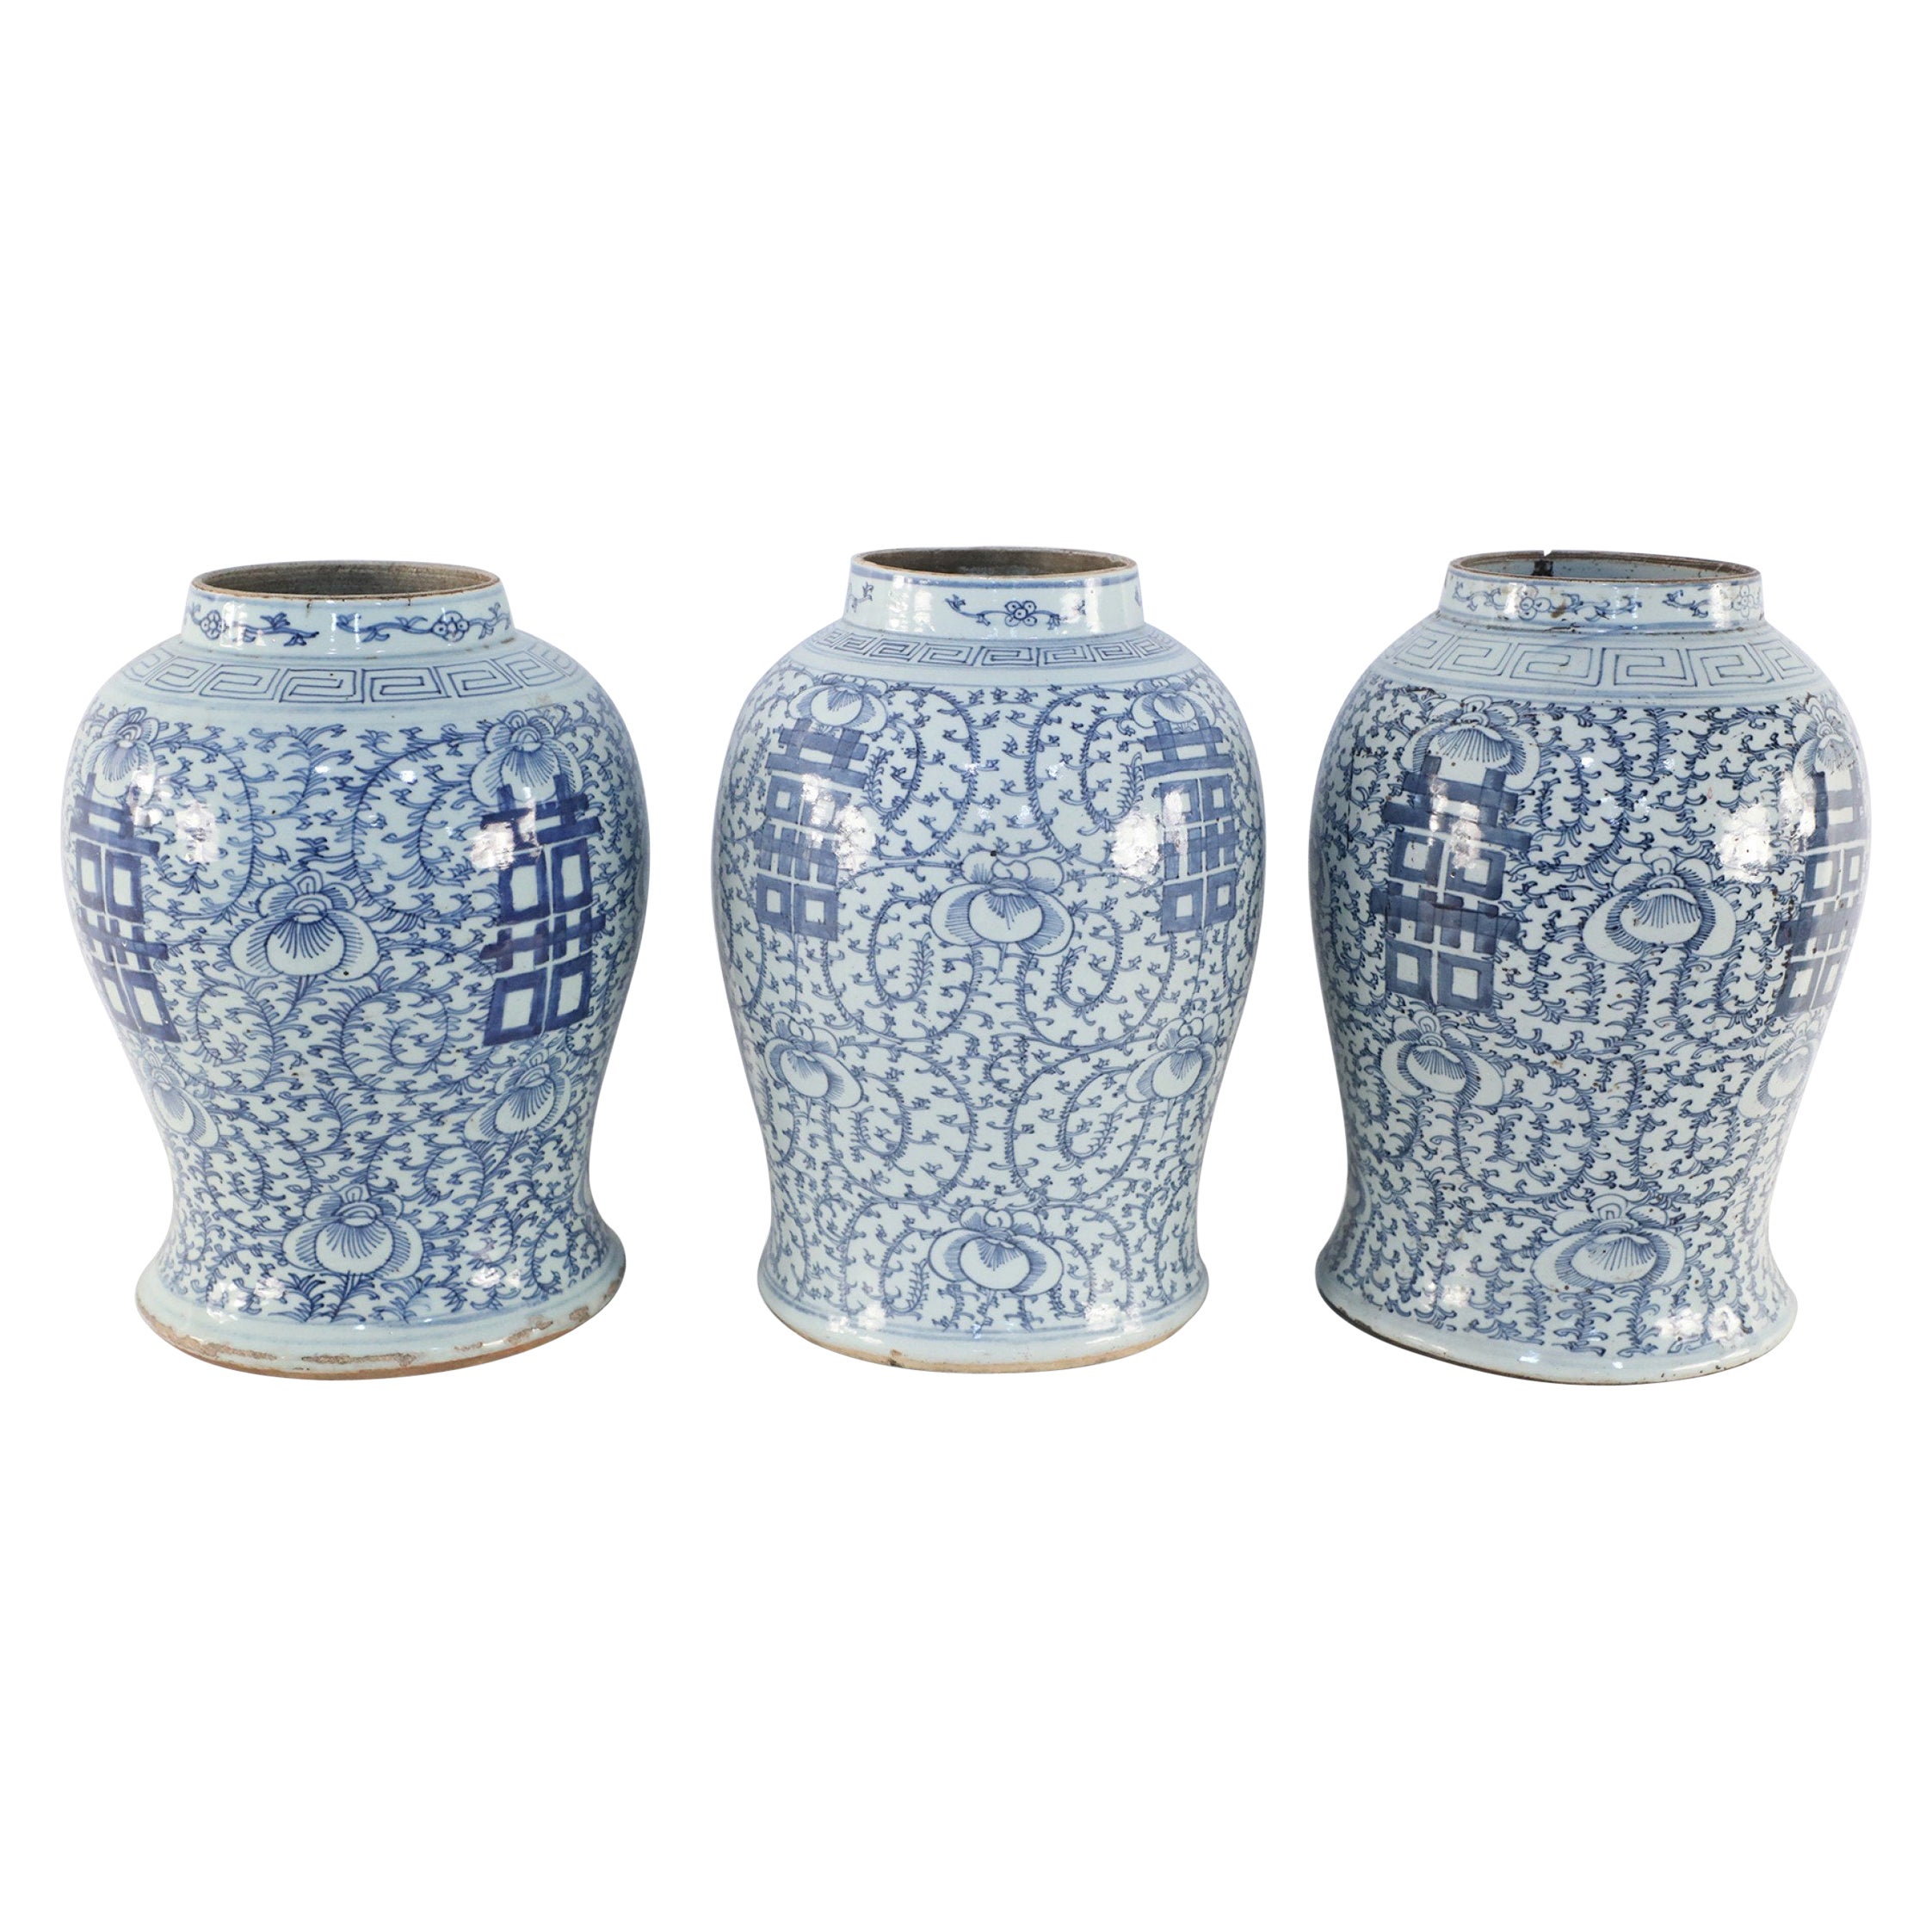 Chinese Off-White and Blue Vine Character Porcelain Urn Vases For Sale